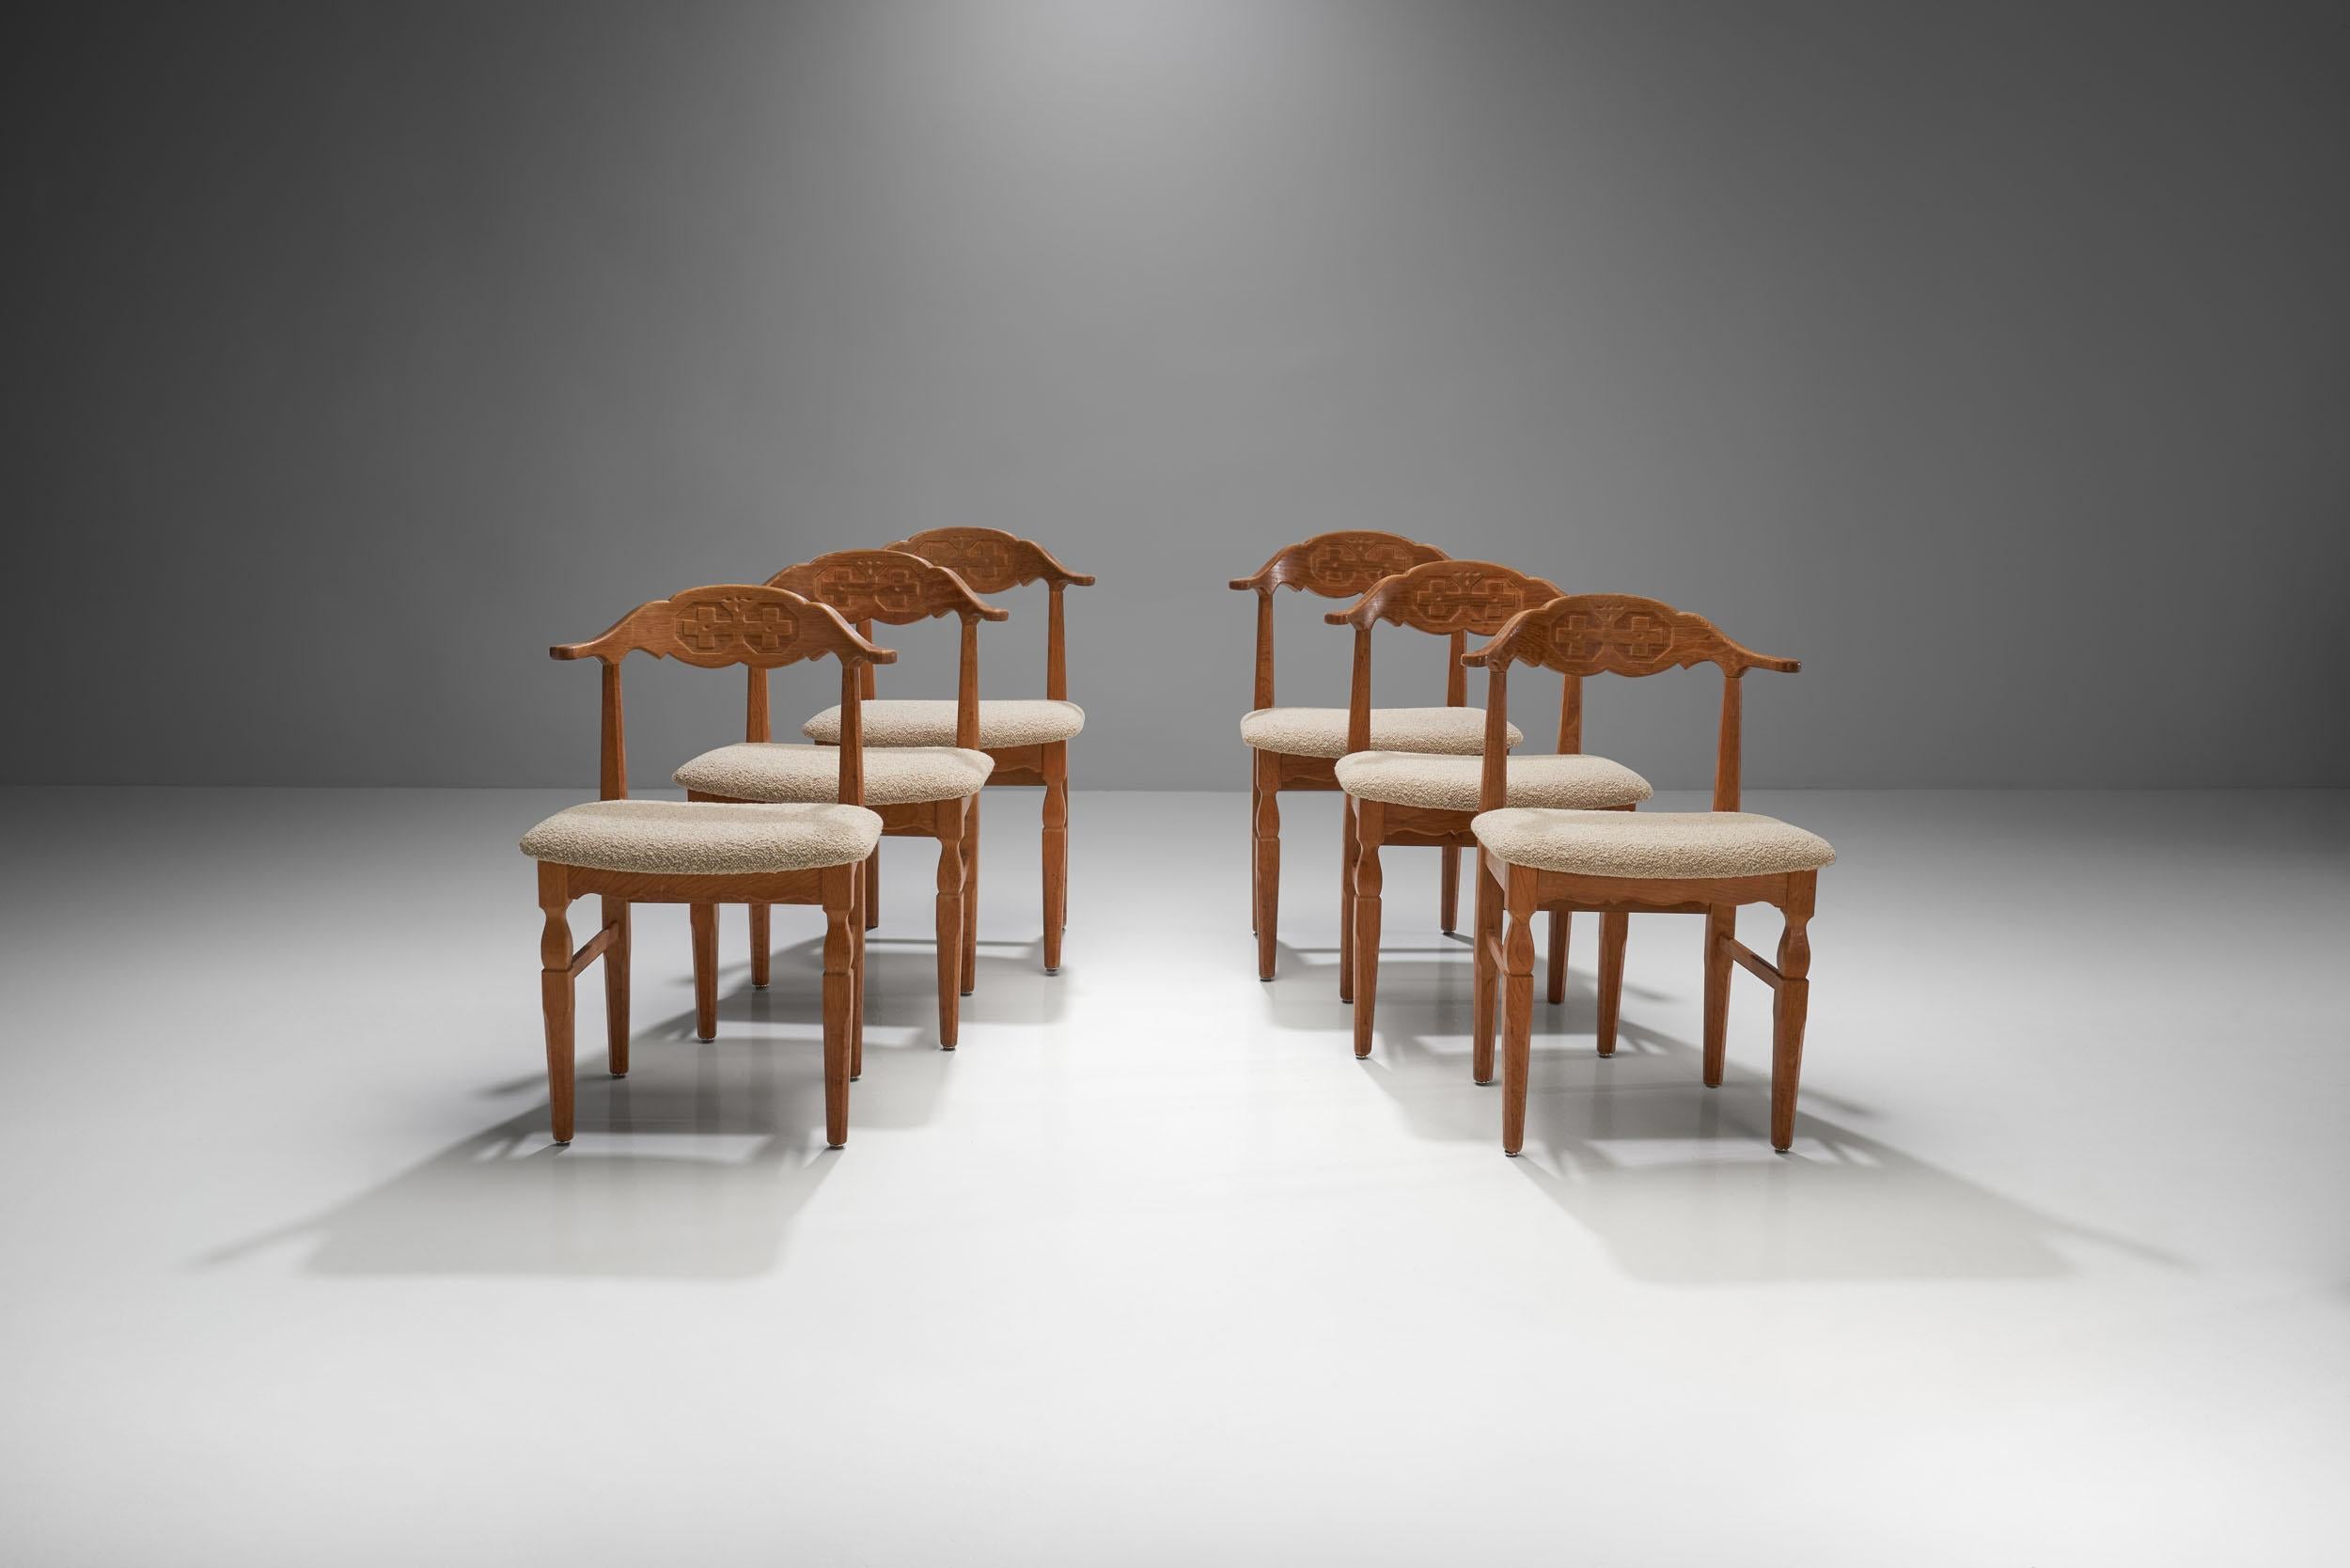 Designed by Henning Kjærnulf, Denmark 1960s. This set of six oak chairs have a curved backrest and display Kjærnulf’s distinctive rustic yet modern style. The chairs have carved details on the backrest and the legs that further add to their unique